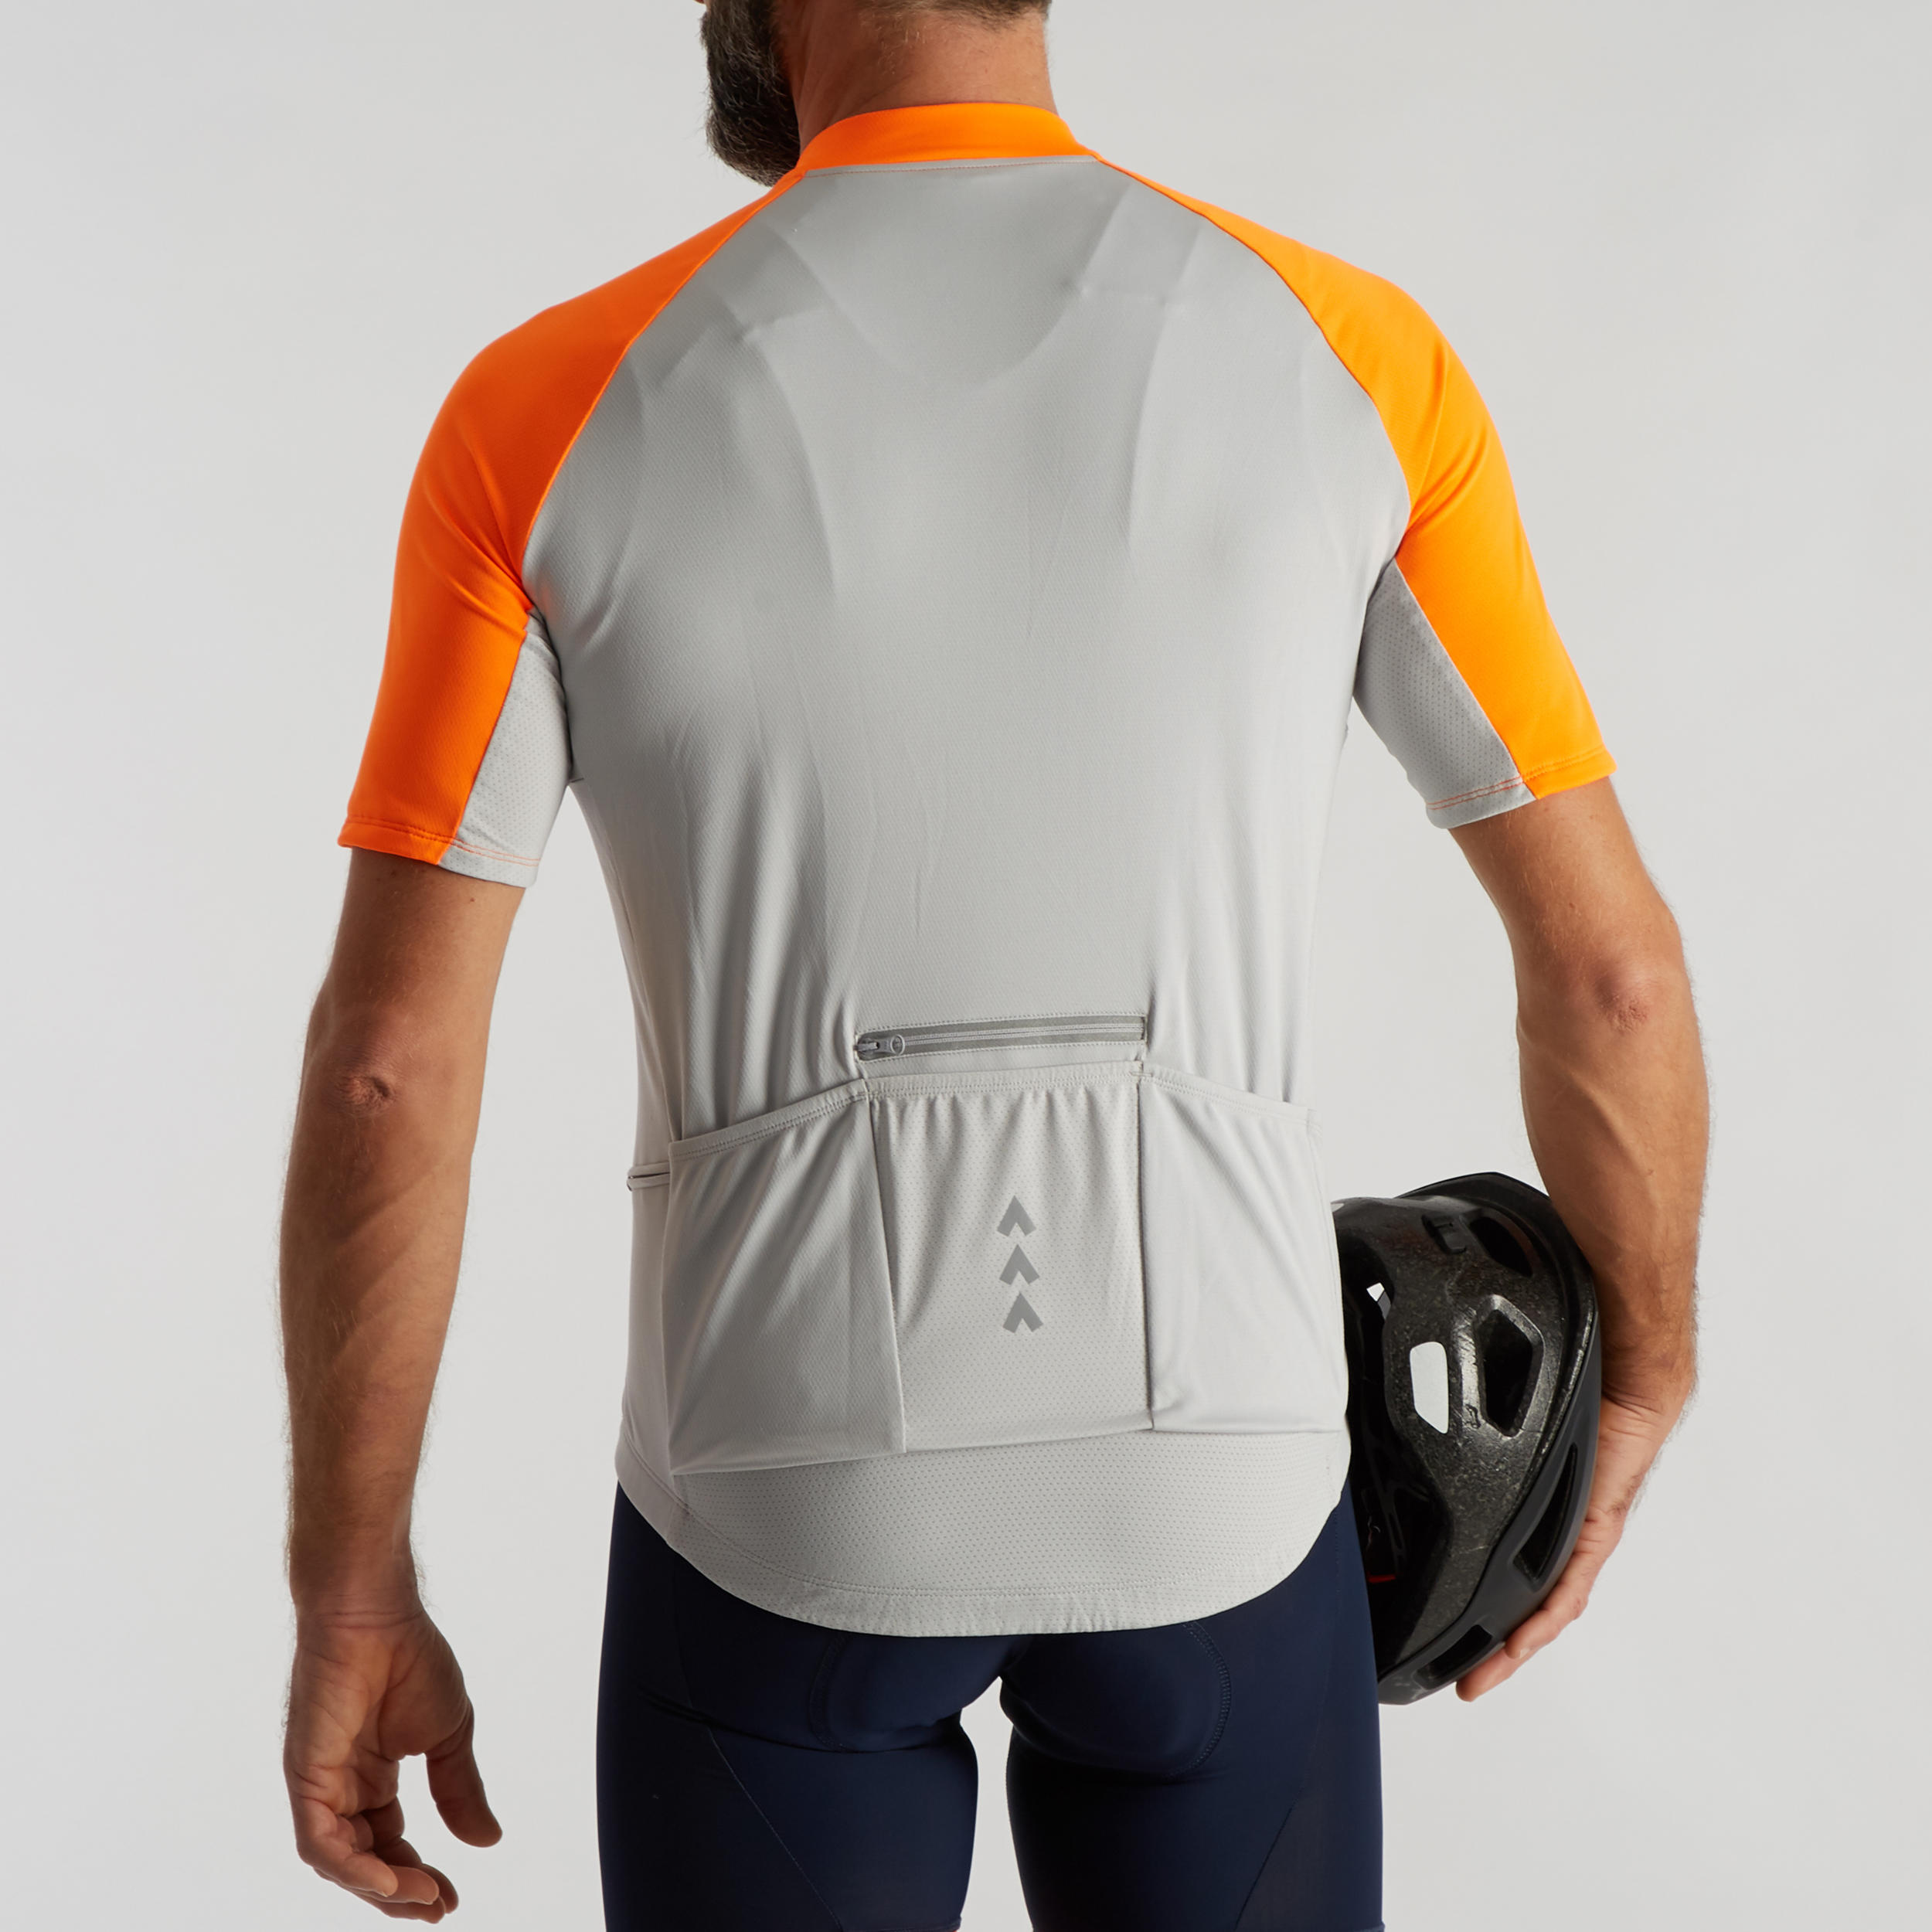 RC100 Short-Sleeved Warm Weather Road Cycling and Touring Jersey - Grey/Orange 4/11